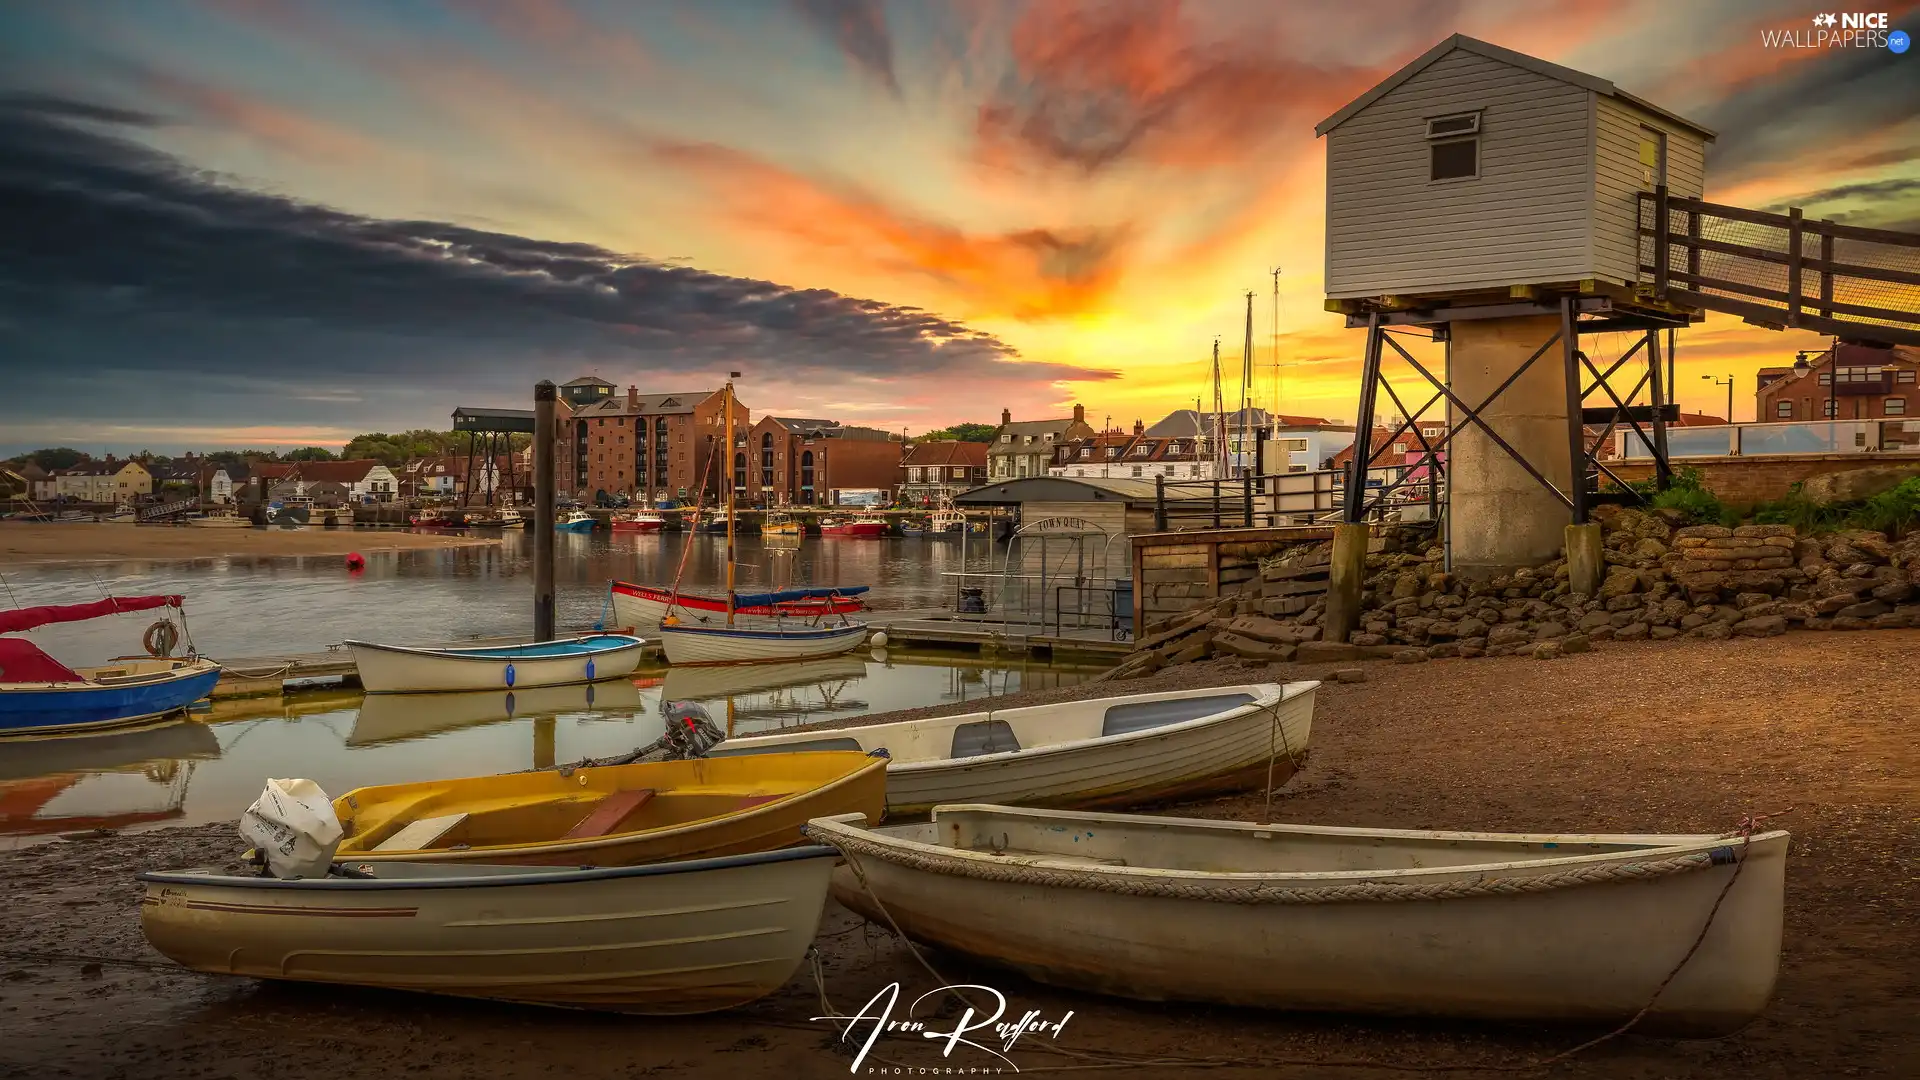 sea, Harbour, Norfolk, Houses, boats, Great Sunsets, England